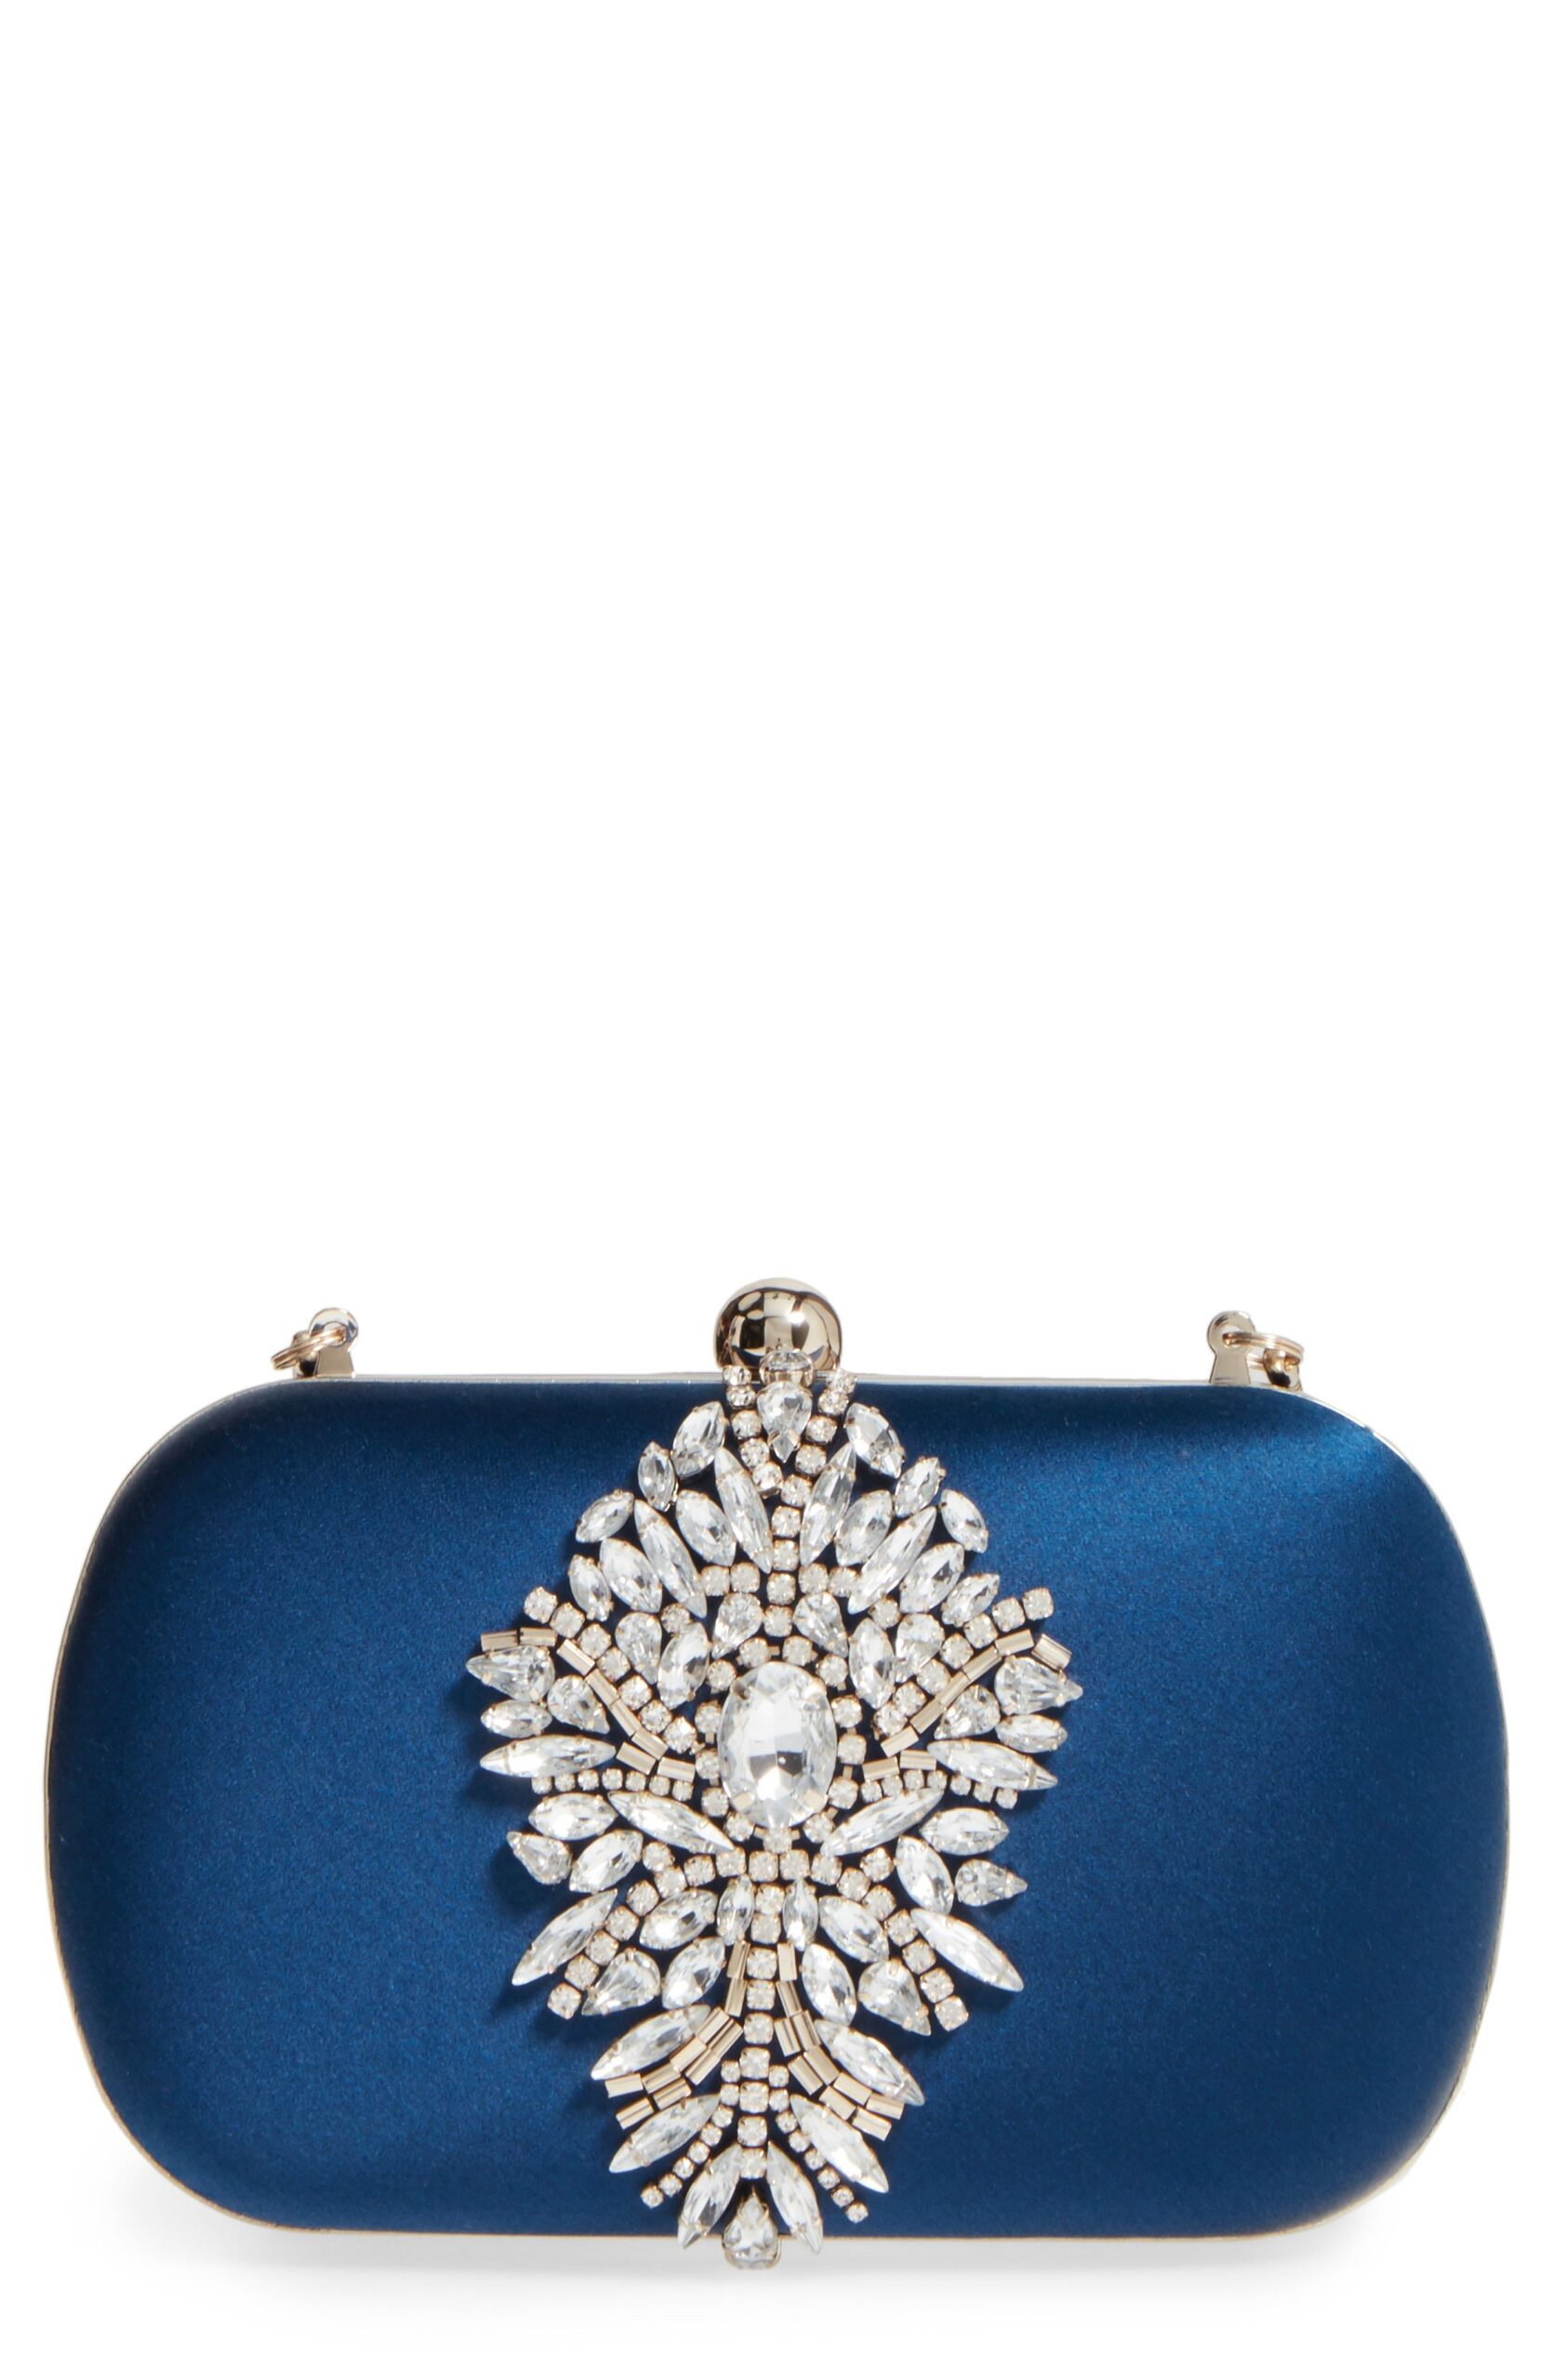 Jeweled Clutch For Parties